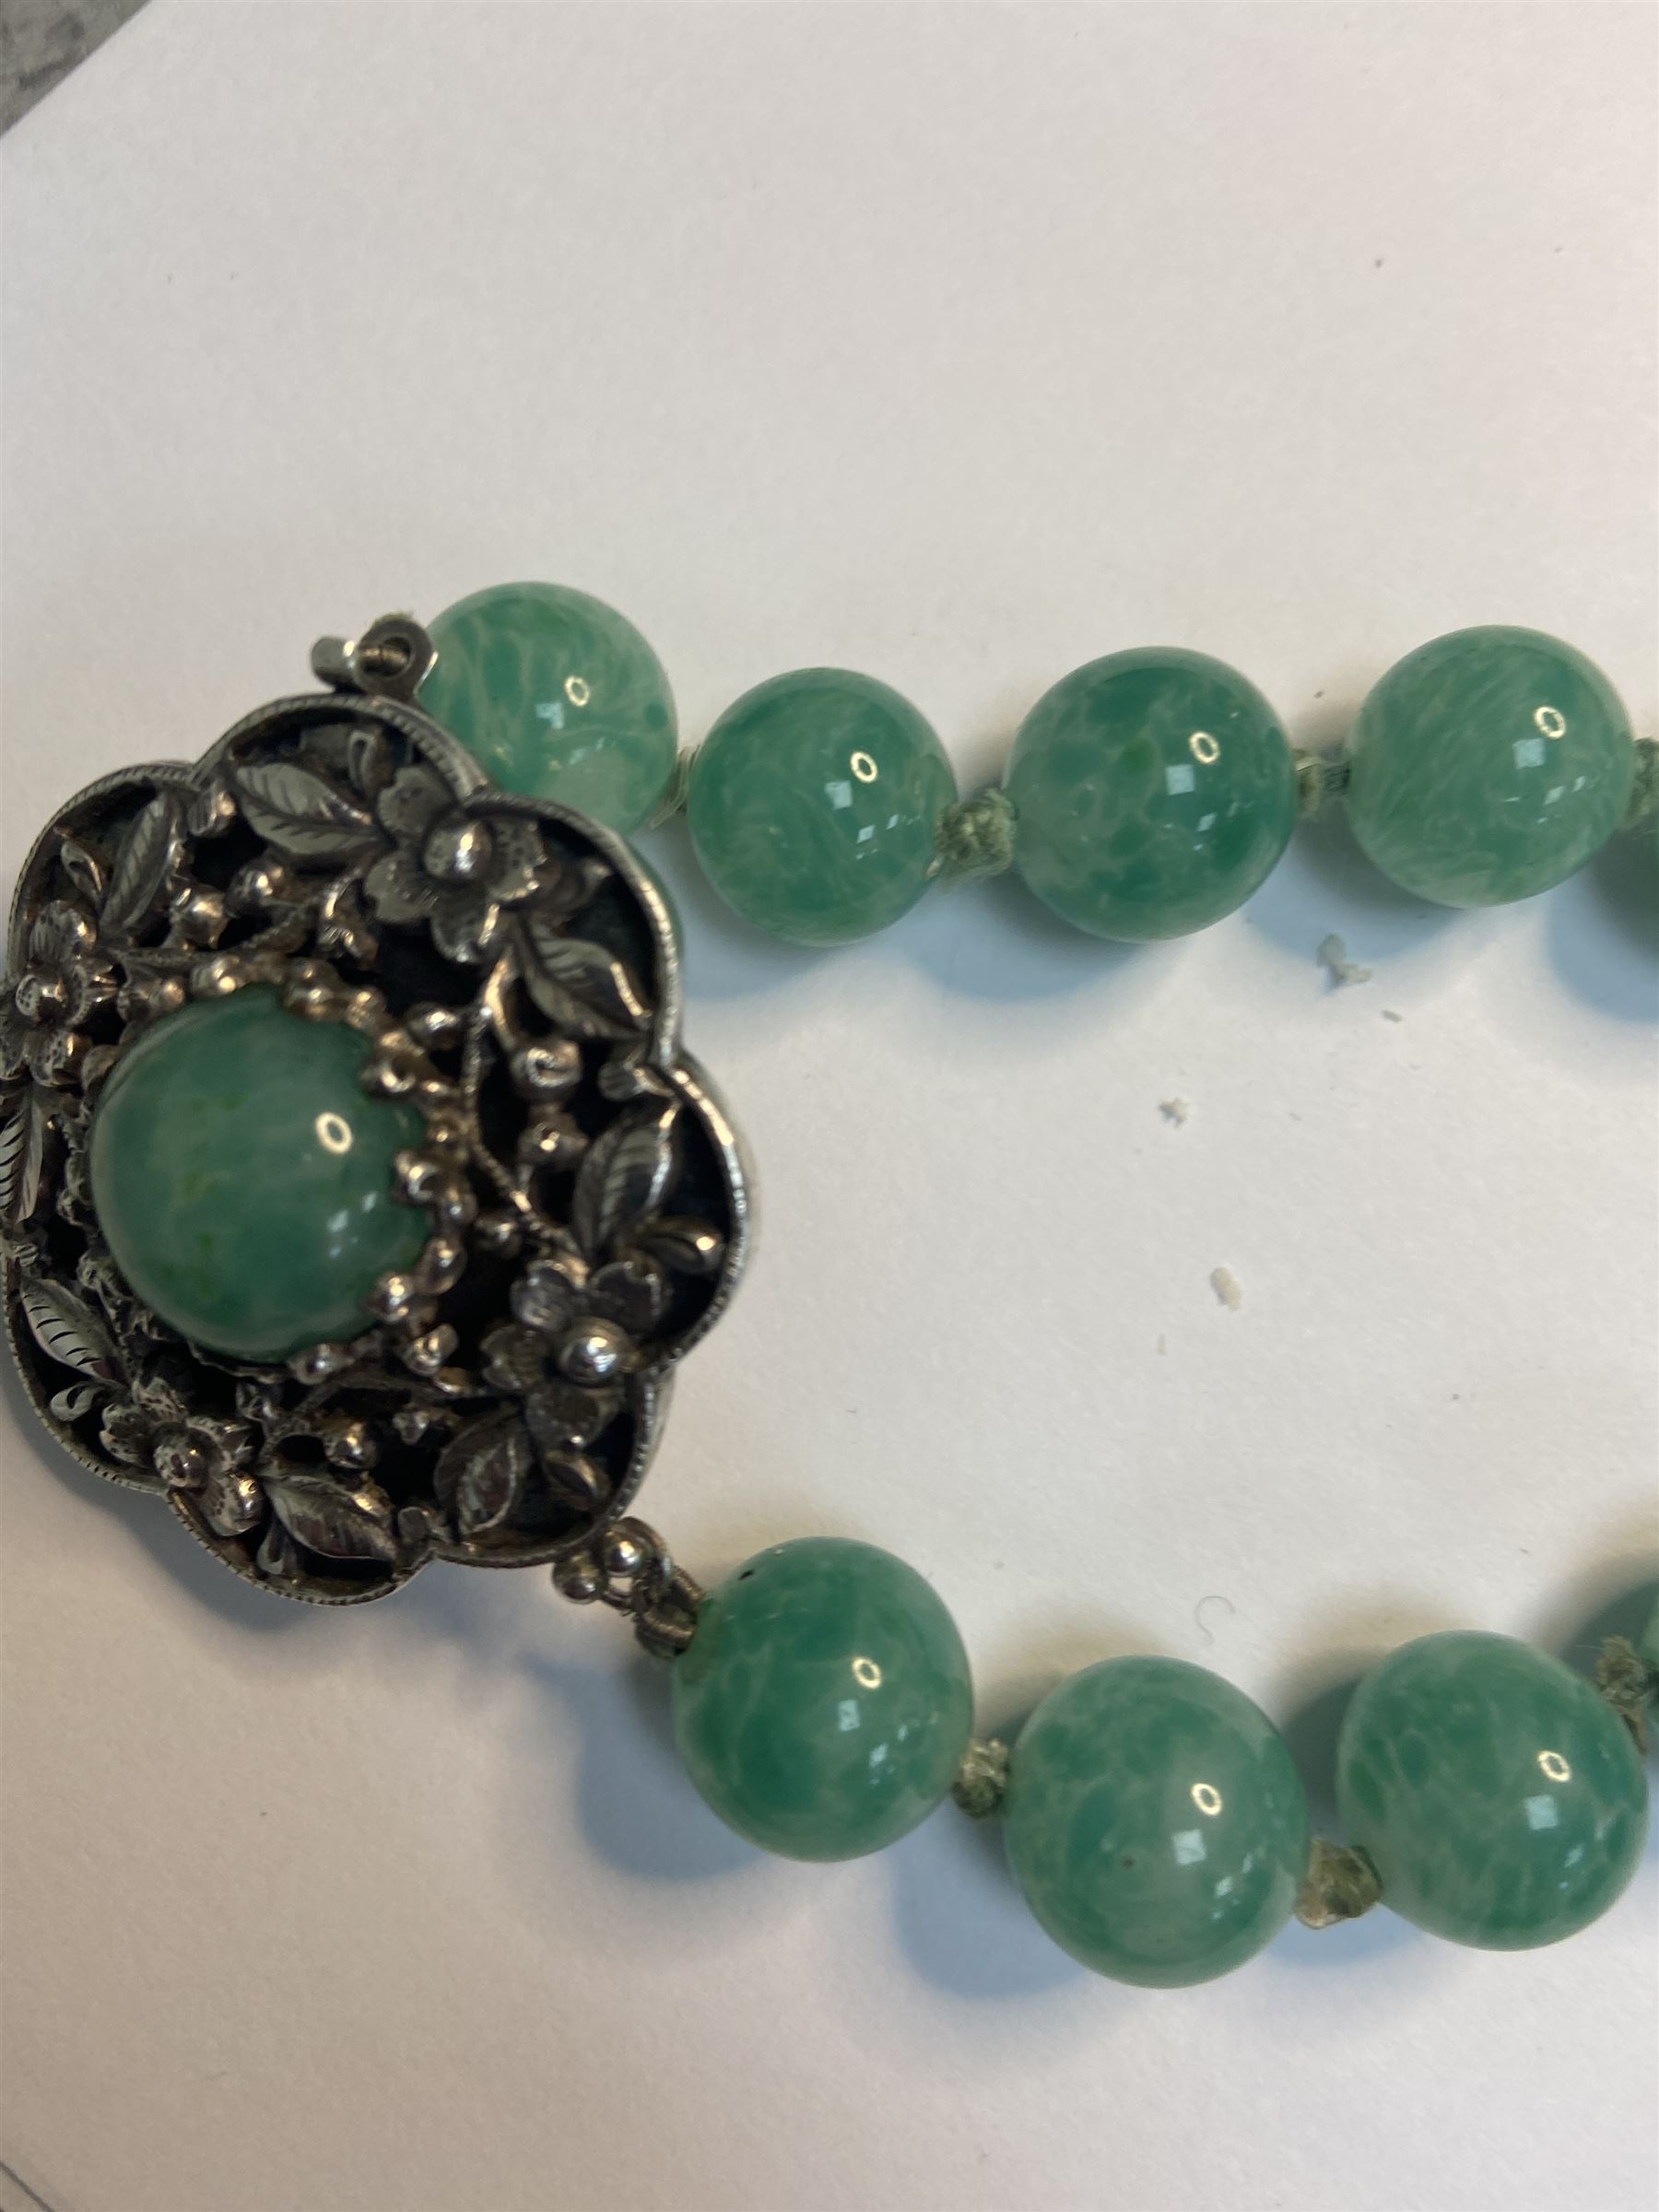 Chinese jade bead necklace with silver open work clasp with a cabochon greenstone/possibly jade bead - Image 3 of 7